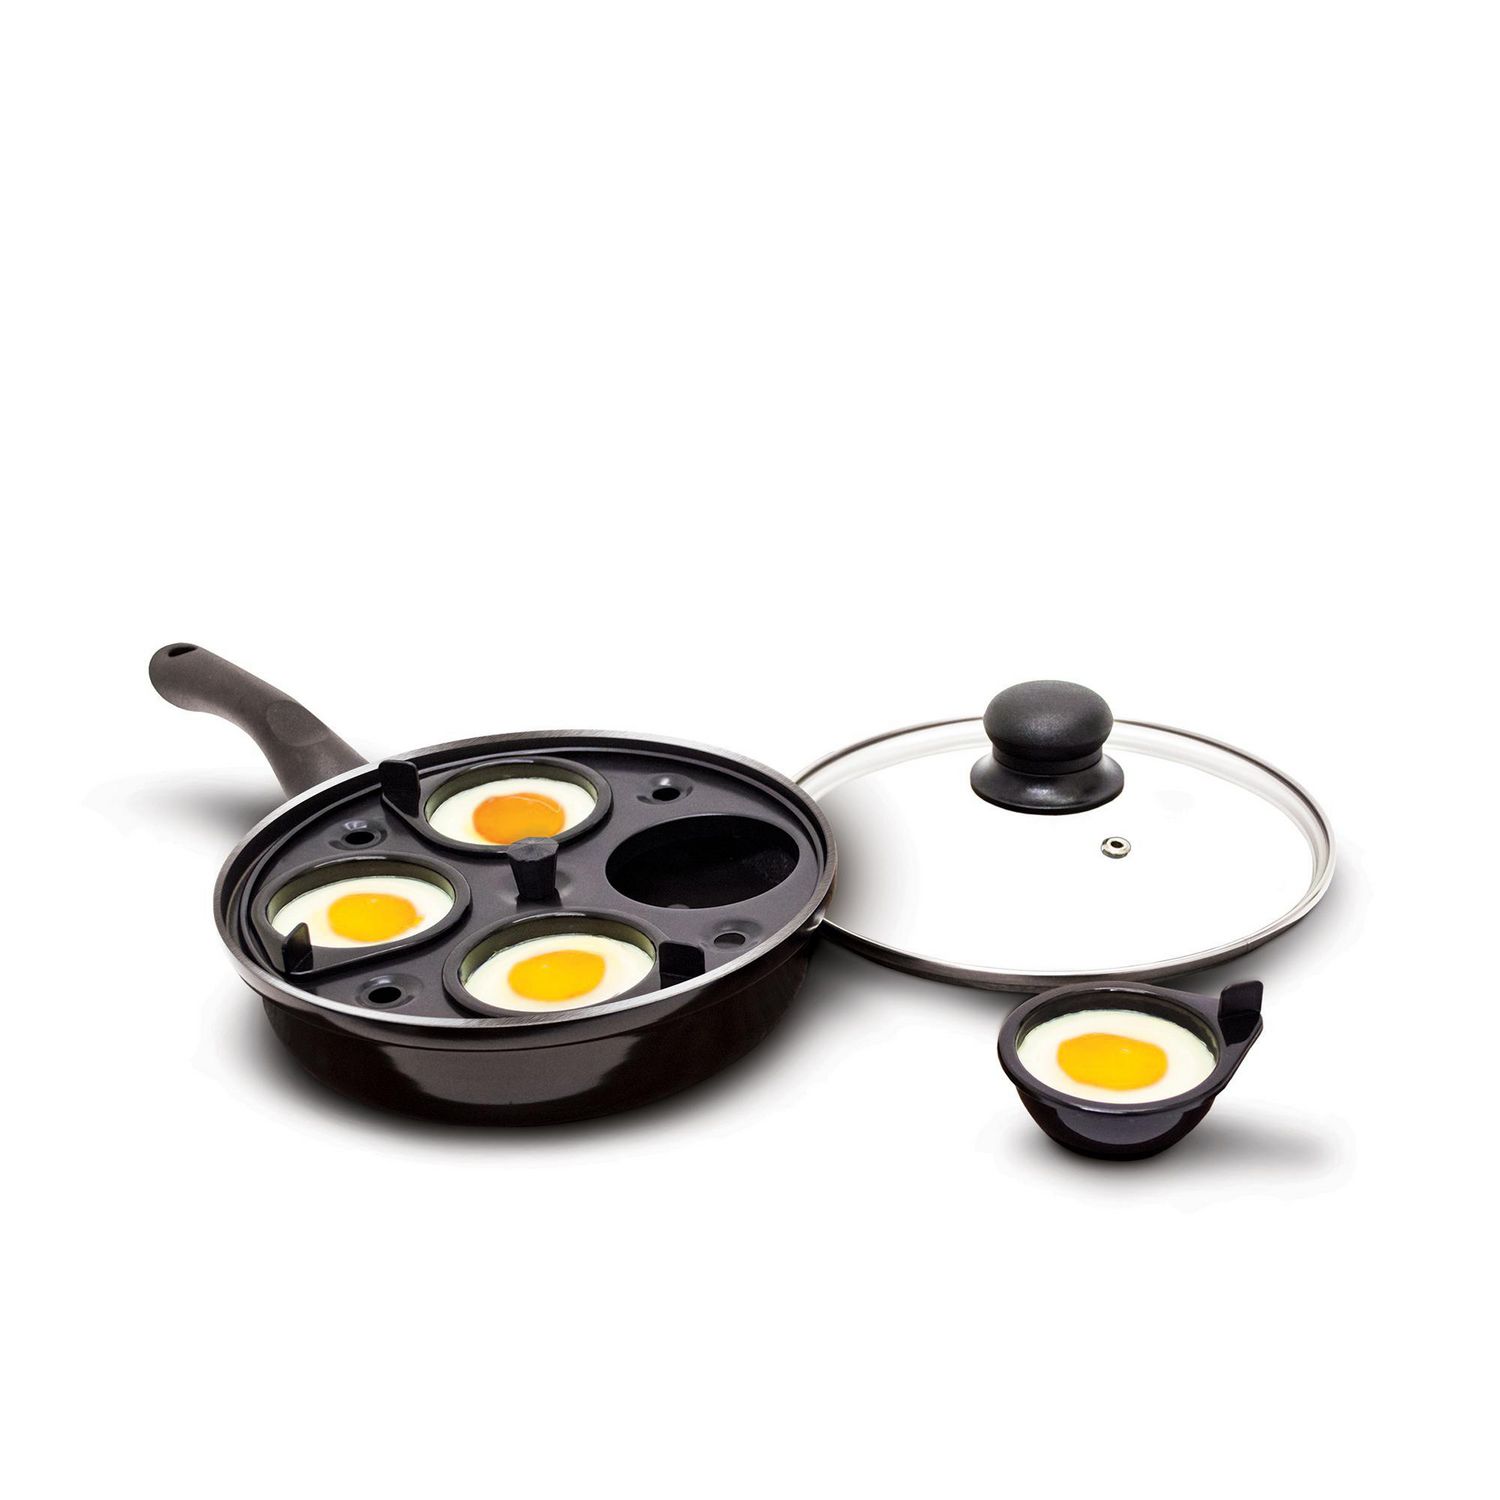 microwave egg cooker canadian tire